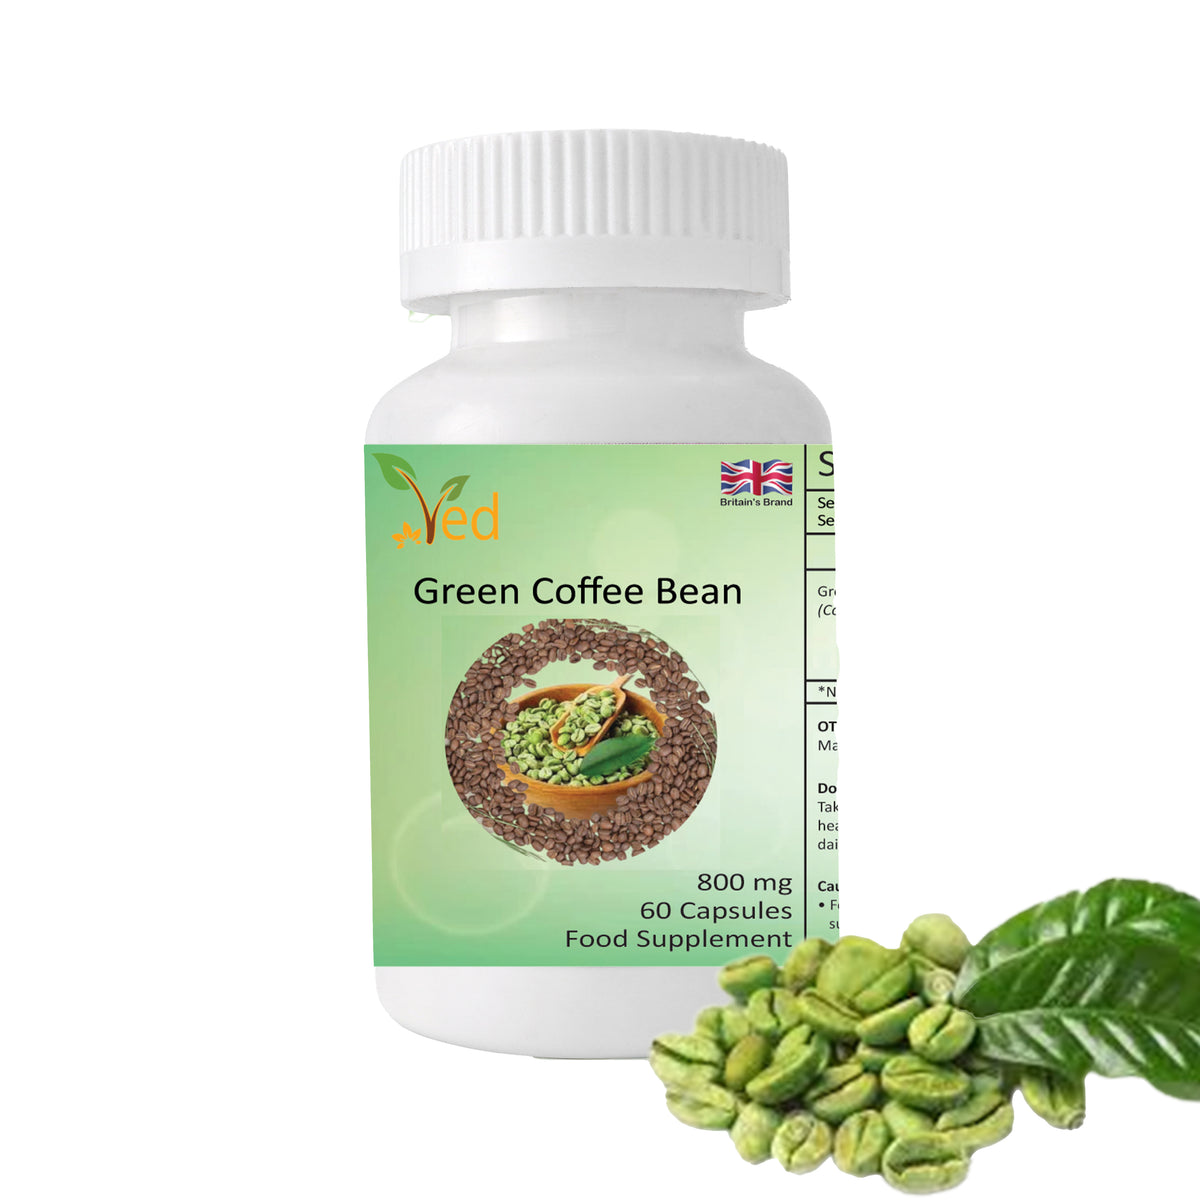 Ved Green Coffee Bean Extract Capsules, Vegan & Vegetarian Friendly,800 mg per Serving,Non-GMO, Gluten-Free 60 Capsule (60 Days Supply)